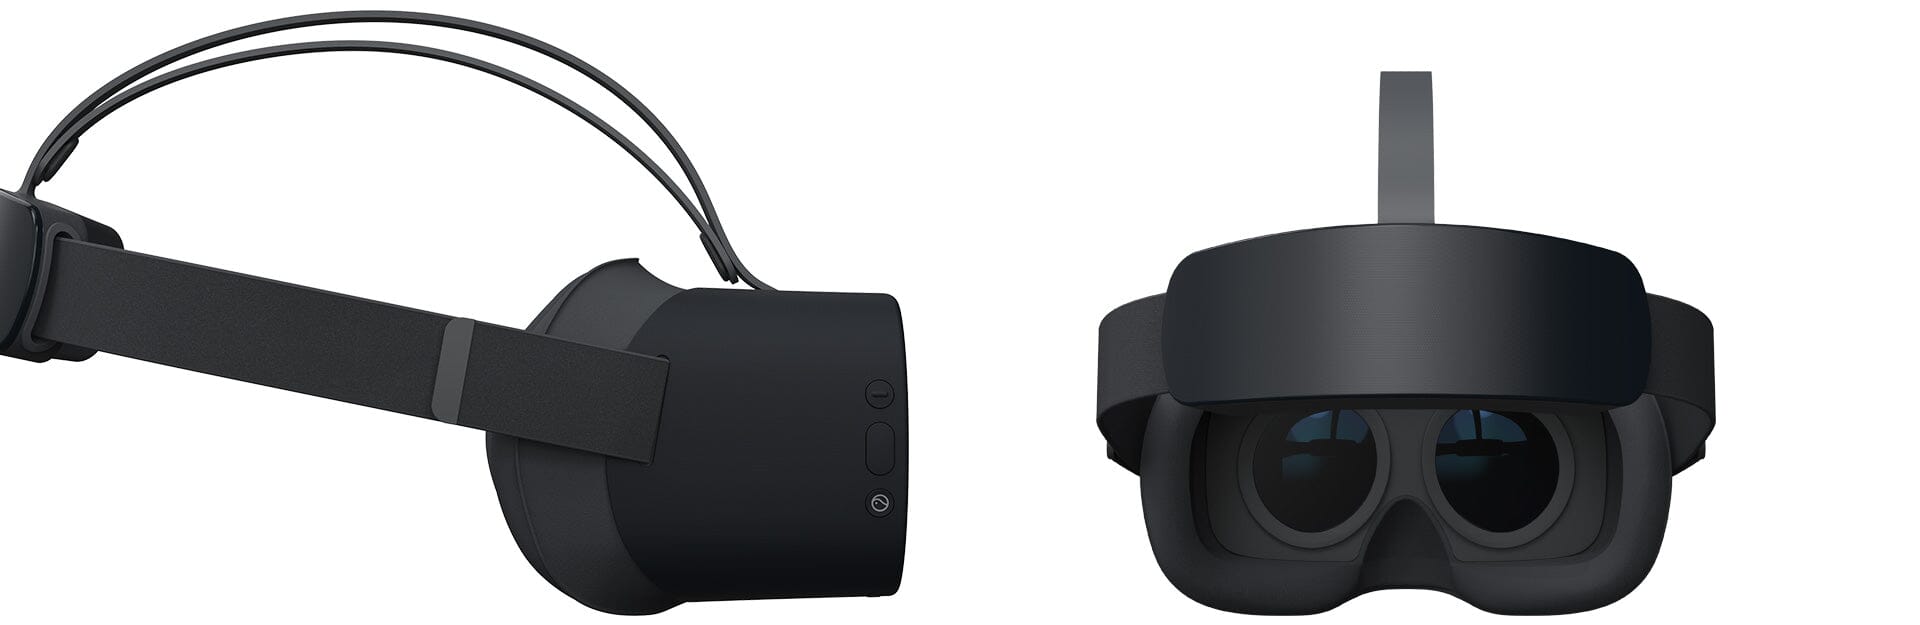 Custom Pico G2 4K All-in-One VR Headset Available | Nibiru